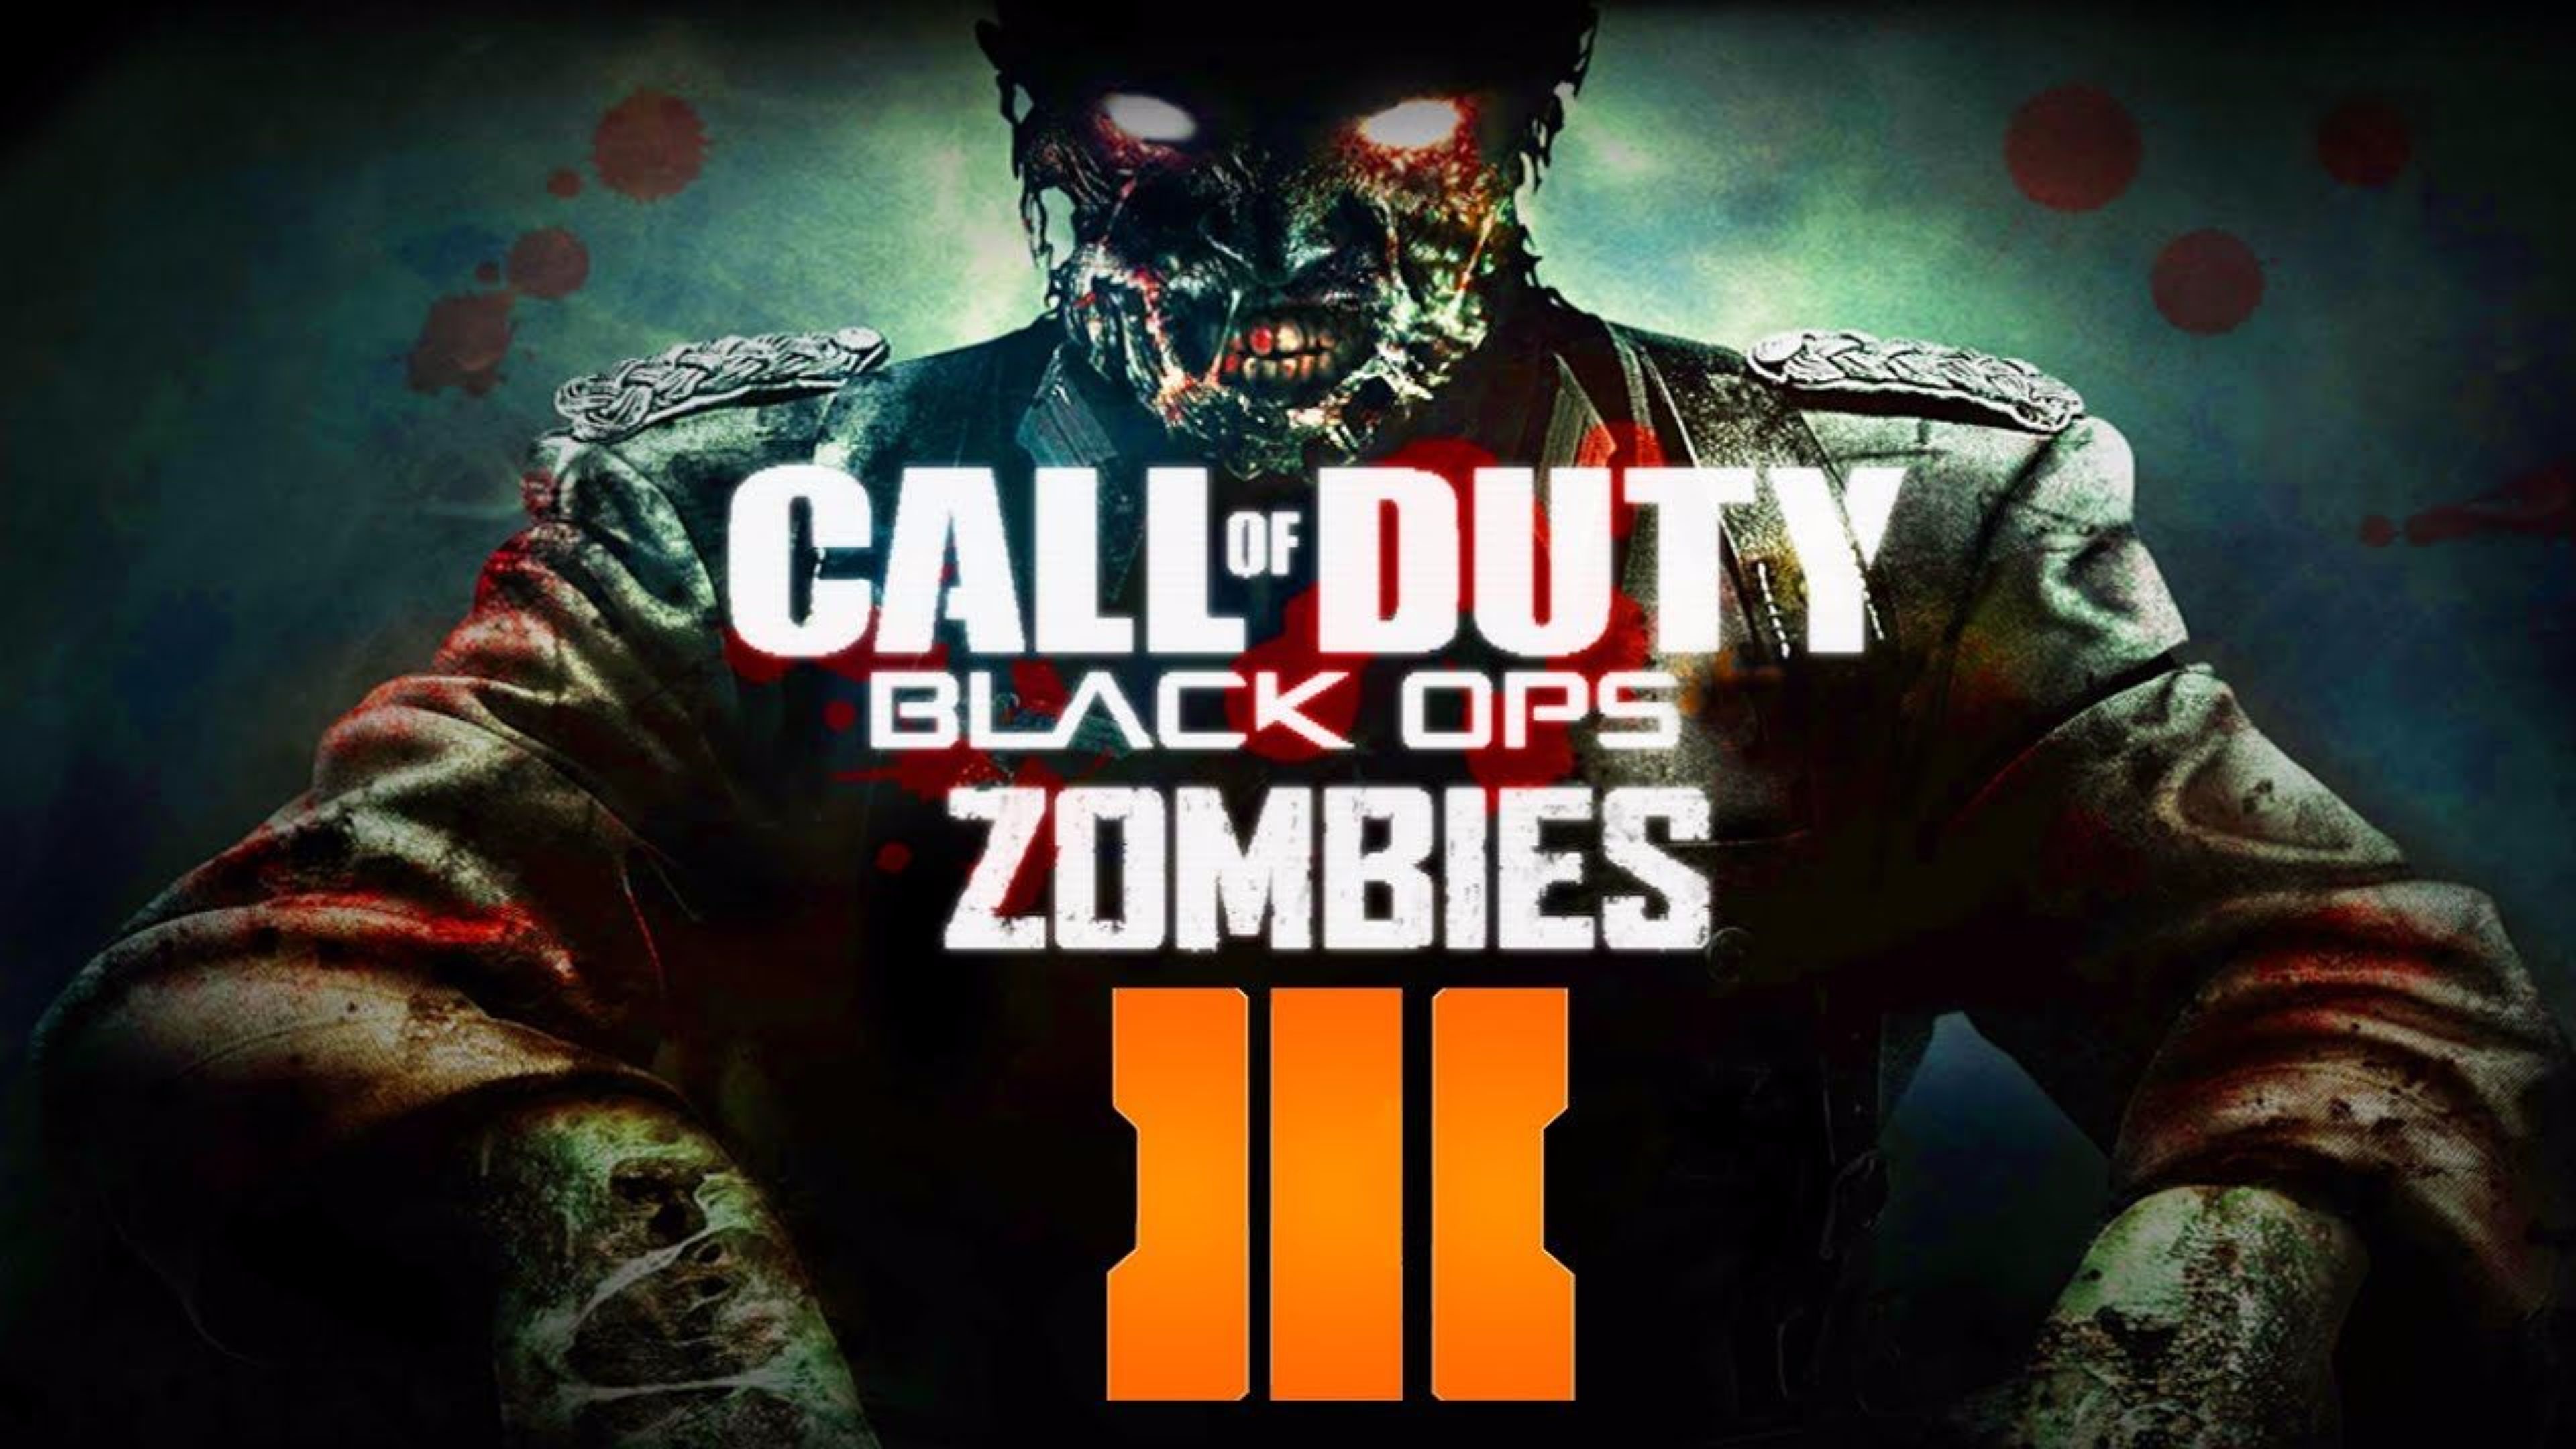 Zombies Call of Duty Black Ops 3 4K